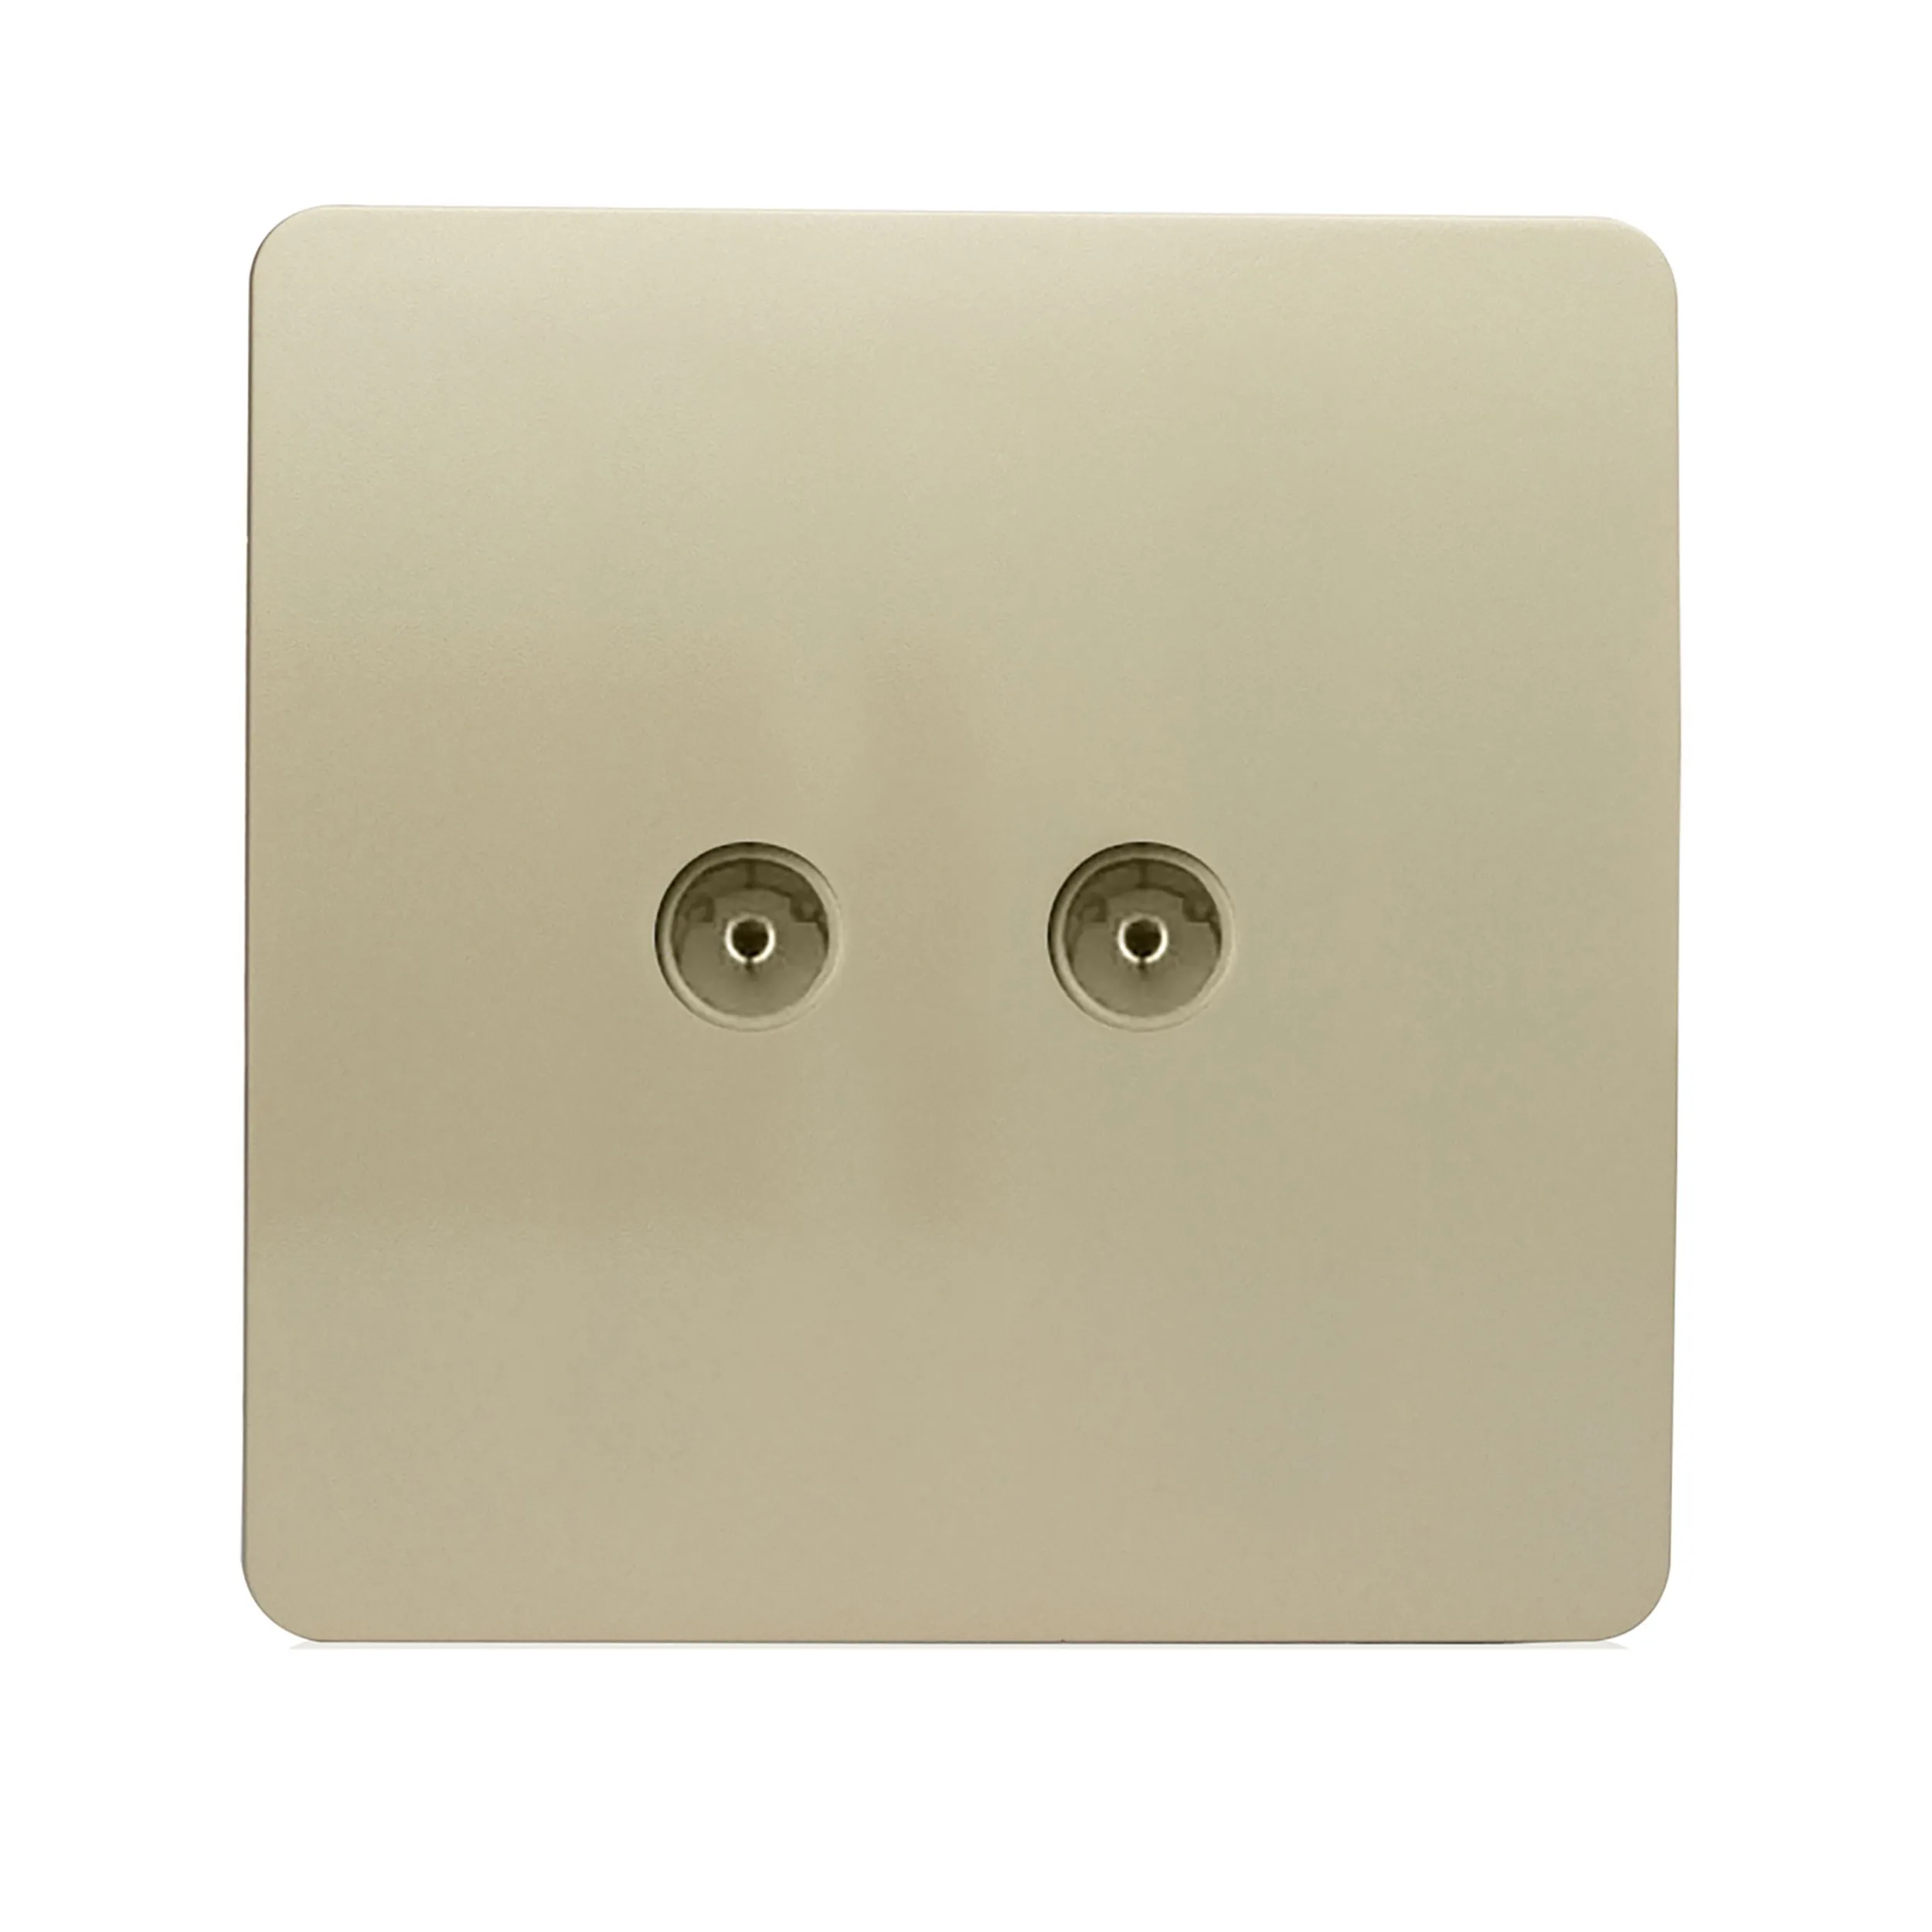 Twin TV Co-Axial Outlet Champagne Gold